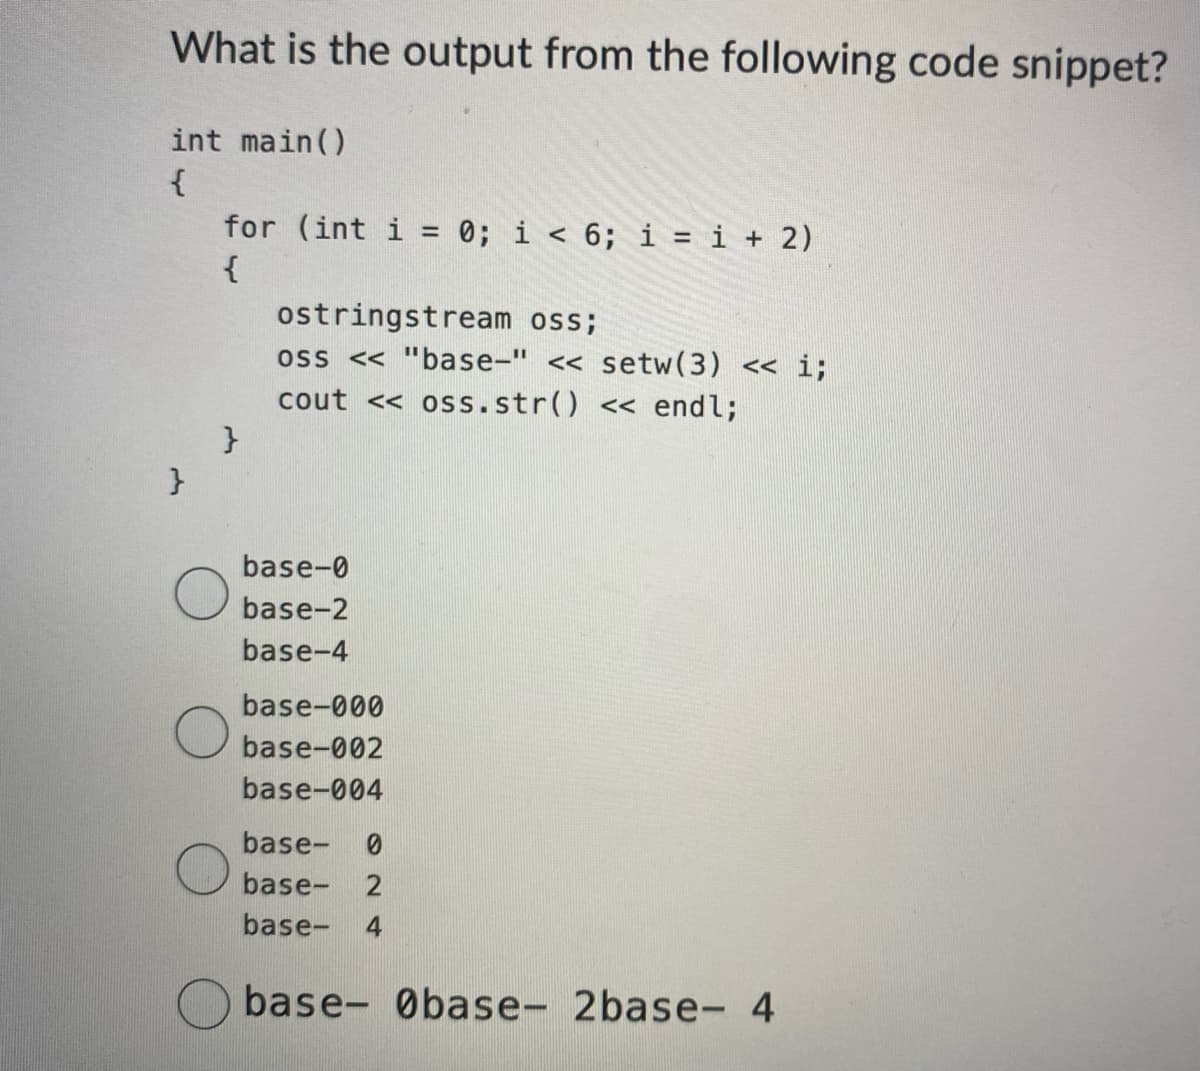 What is the output from the following code snippet?
int main()
{
}
for (int i = 0; i < 6; i = i + 2)
{
}
ostringstream oss;
oss << "base-" <<setw(3) << i;
cout << oss. str() << endl;
base-0
base-2
base-4
base-000
base-002
base-004
base-
base- 2
base- 4
base- Øbase- 2base- 4